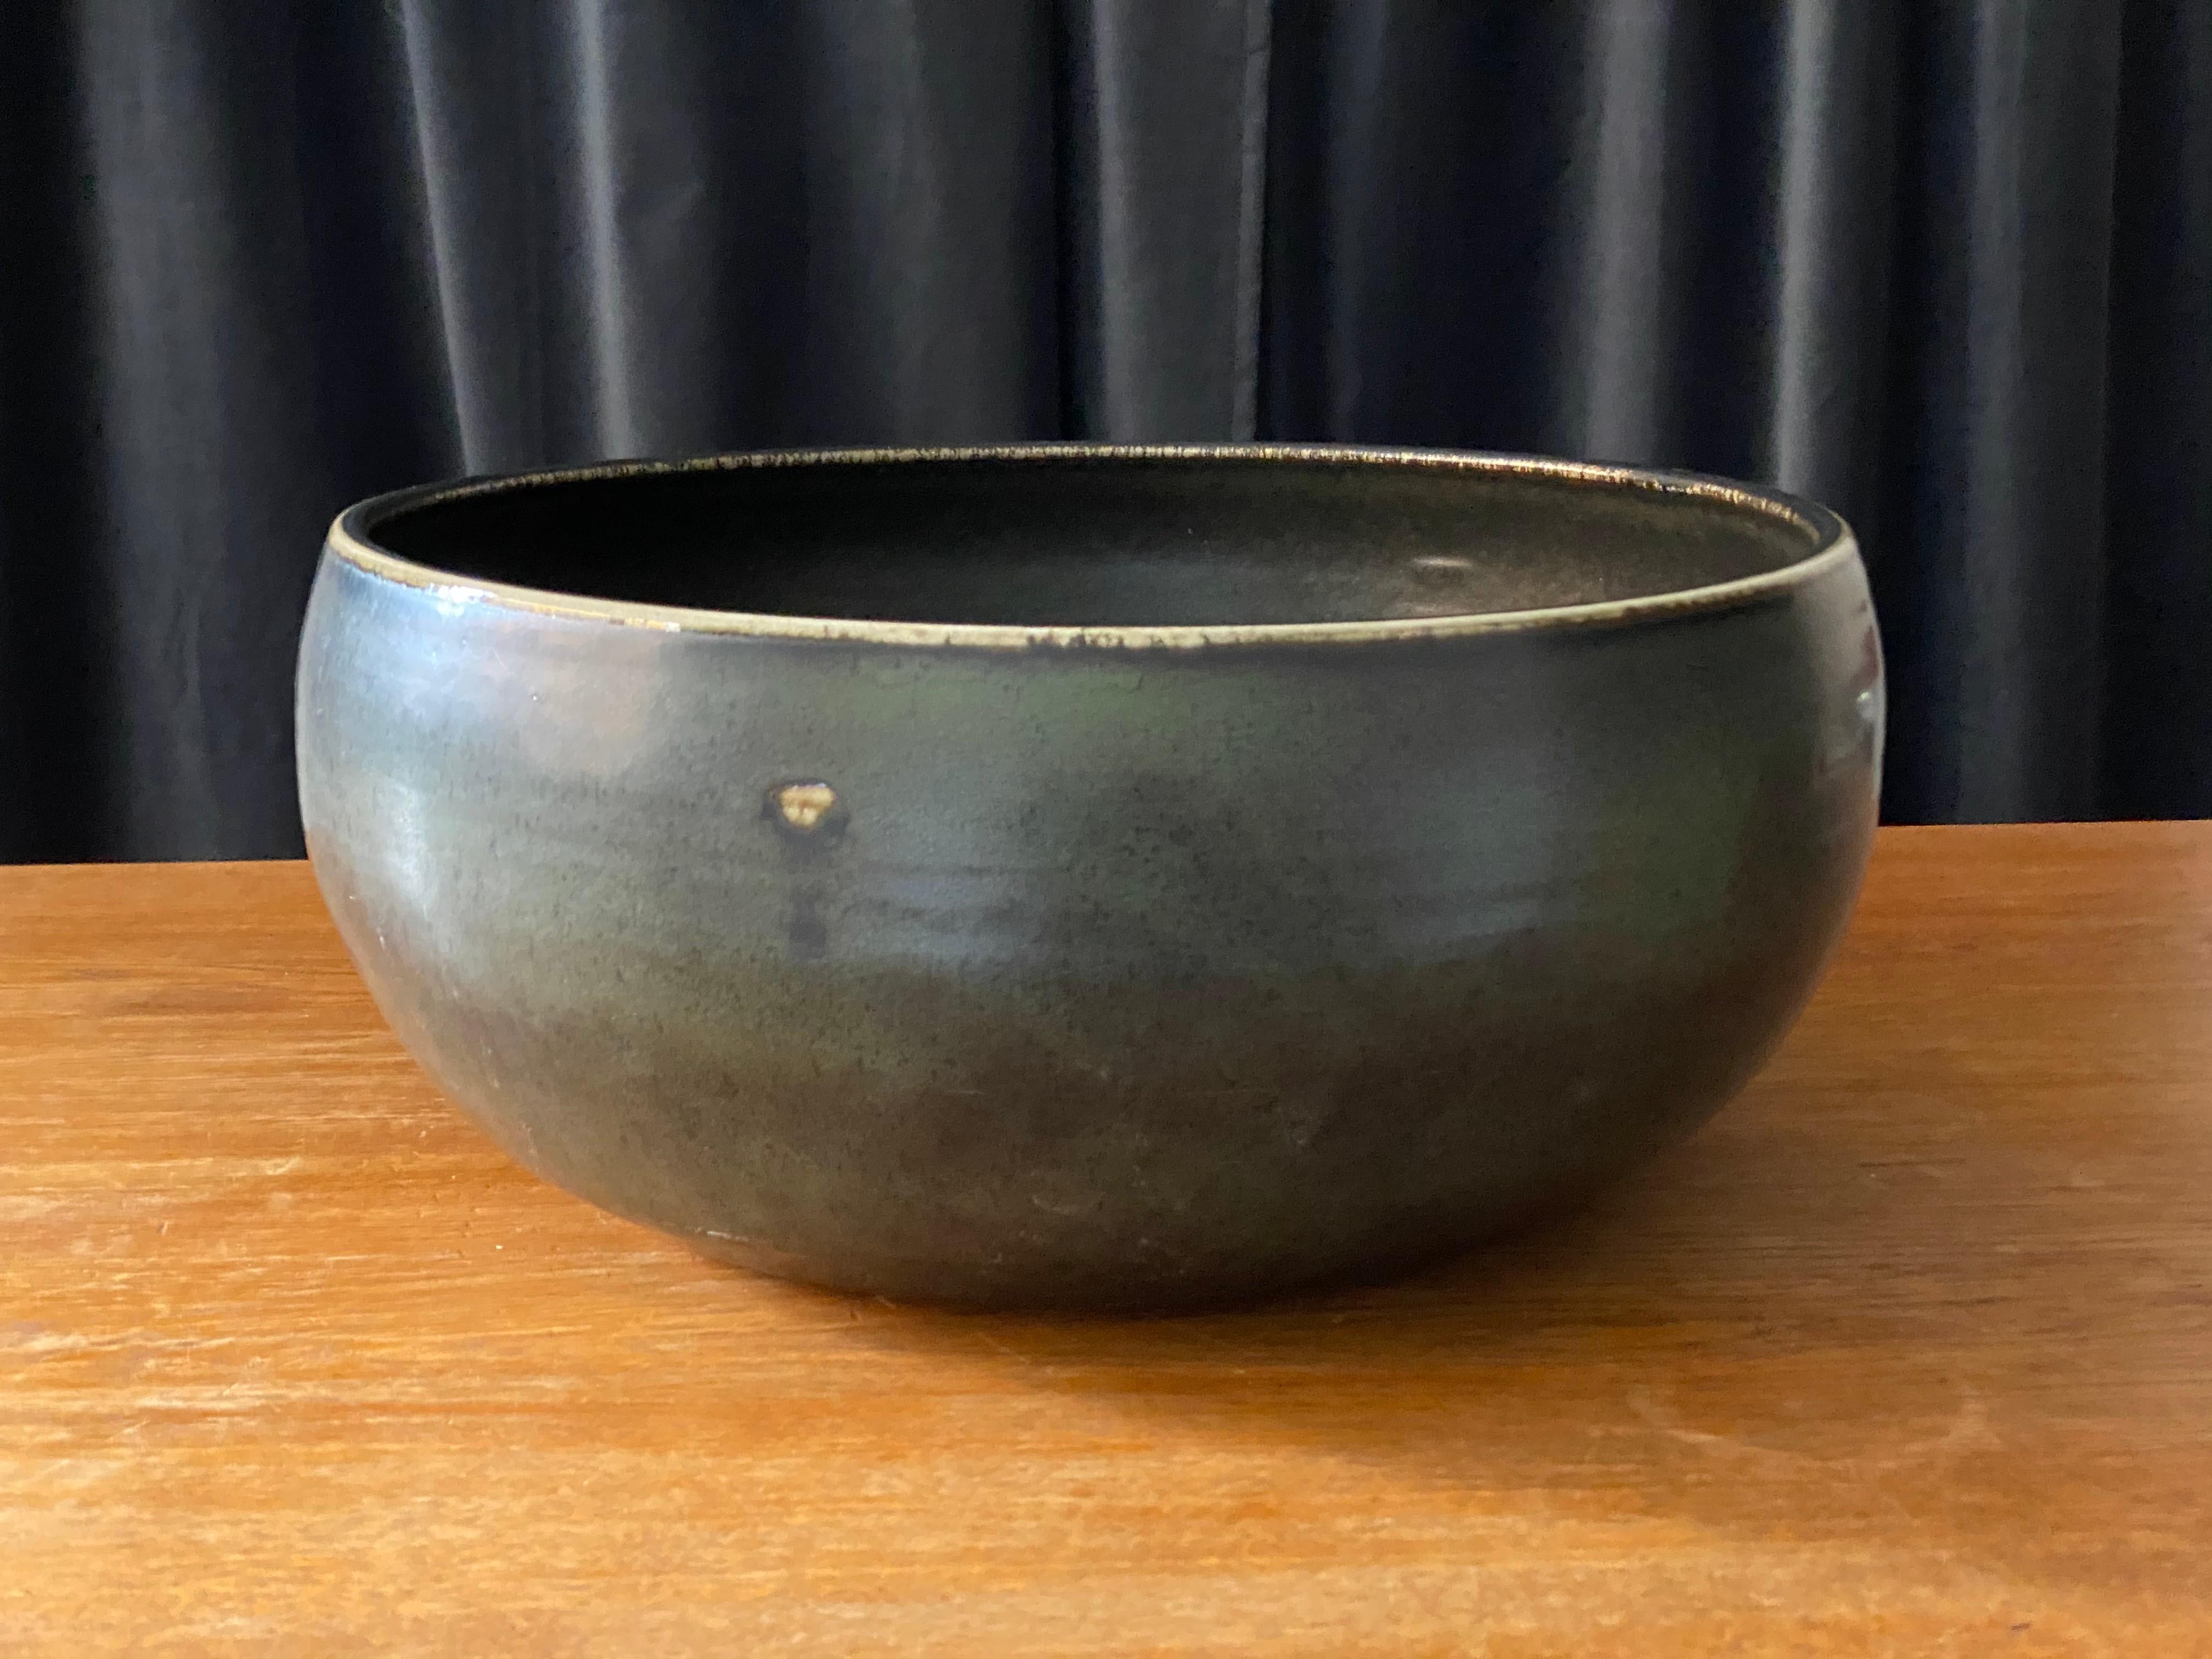 A very large and unique studio bowl by Carl-Harry Stålhane. Hand-signed and dated 1960.

The present bowl was part of a small scale production of unique works developed by the art department at the Swedish ceramic producer Rörstrand. As opposed to